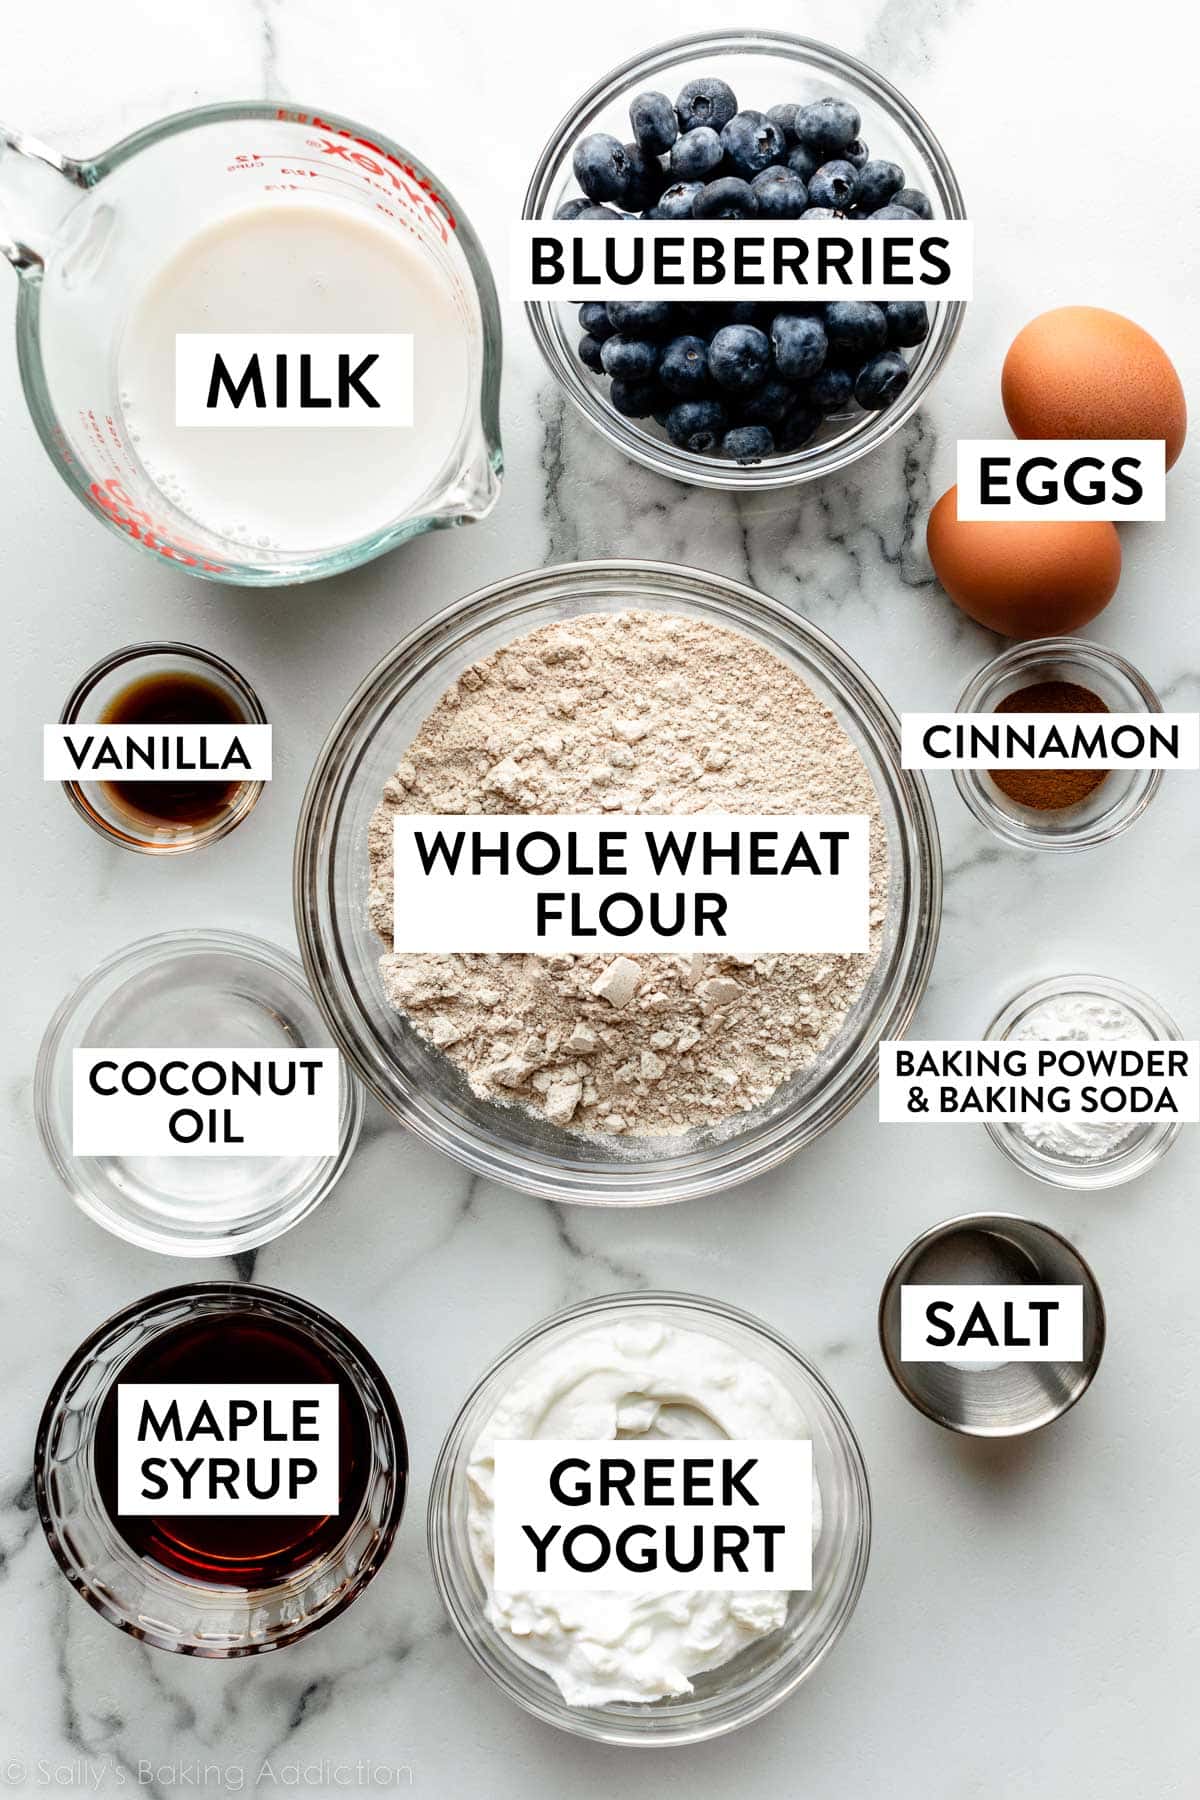 ingredients in bowls on counter including whole wheat flour, blueberries, coconut oil, Greek yogurt, and maple syrup.